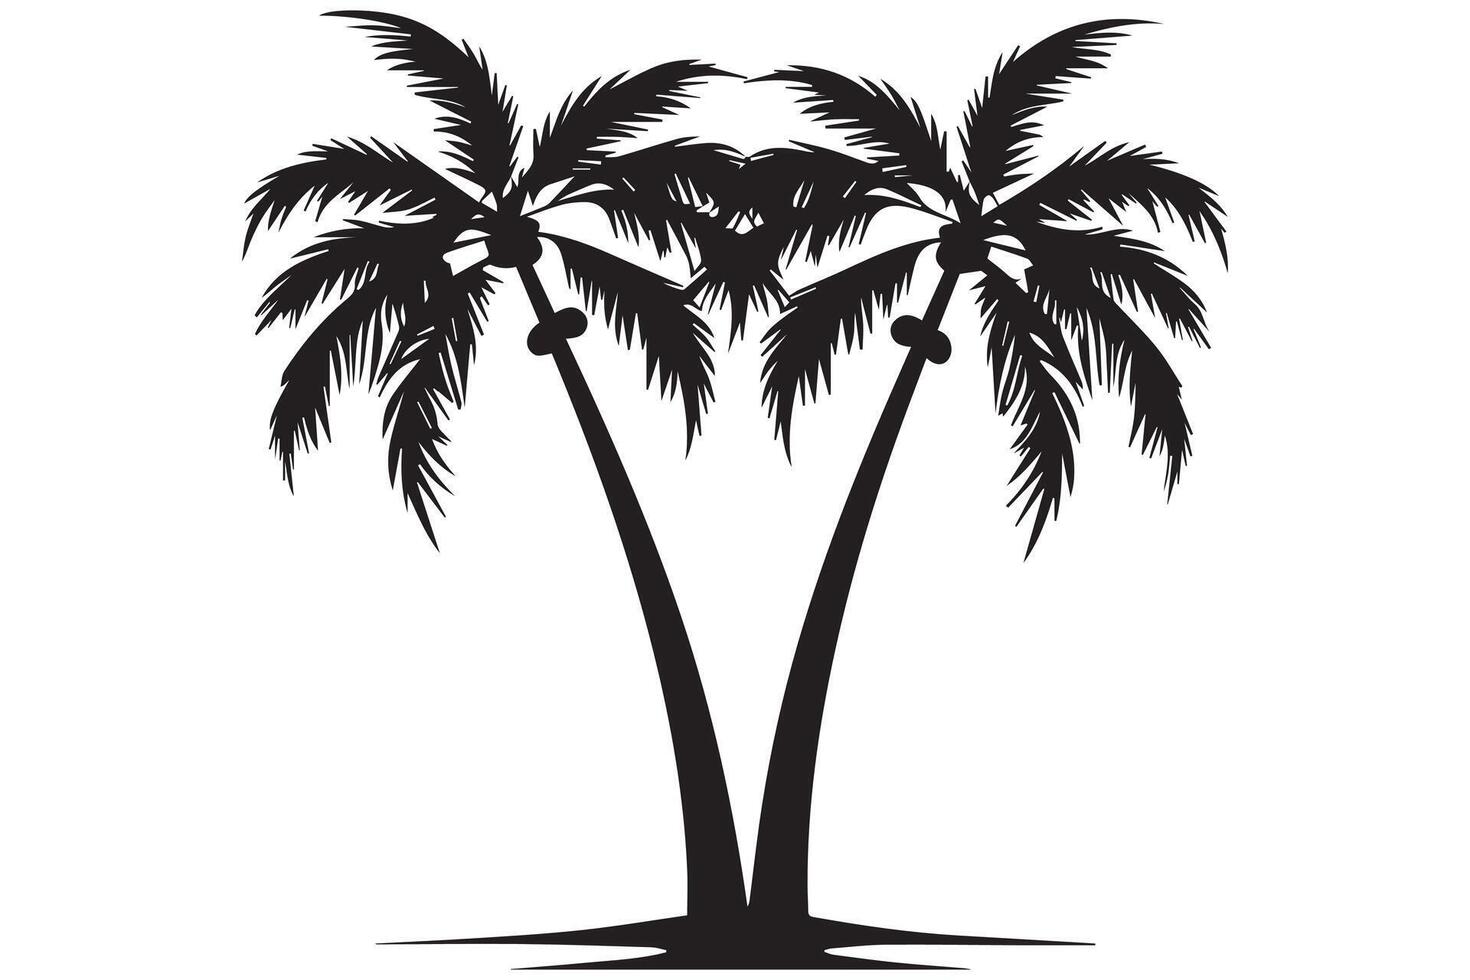 Silhouette of palm trees White background free design vector